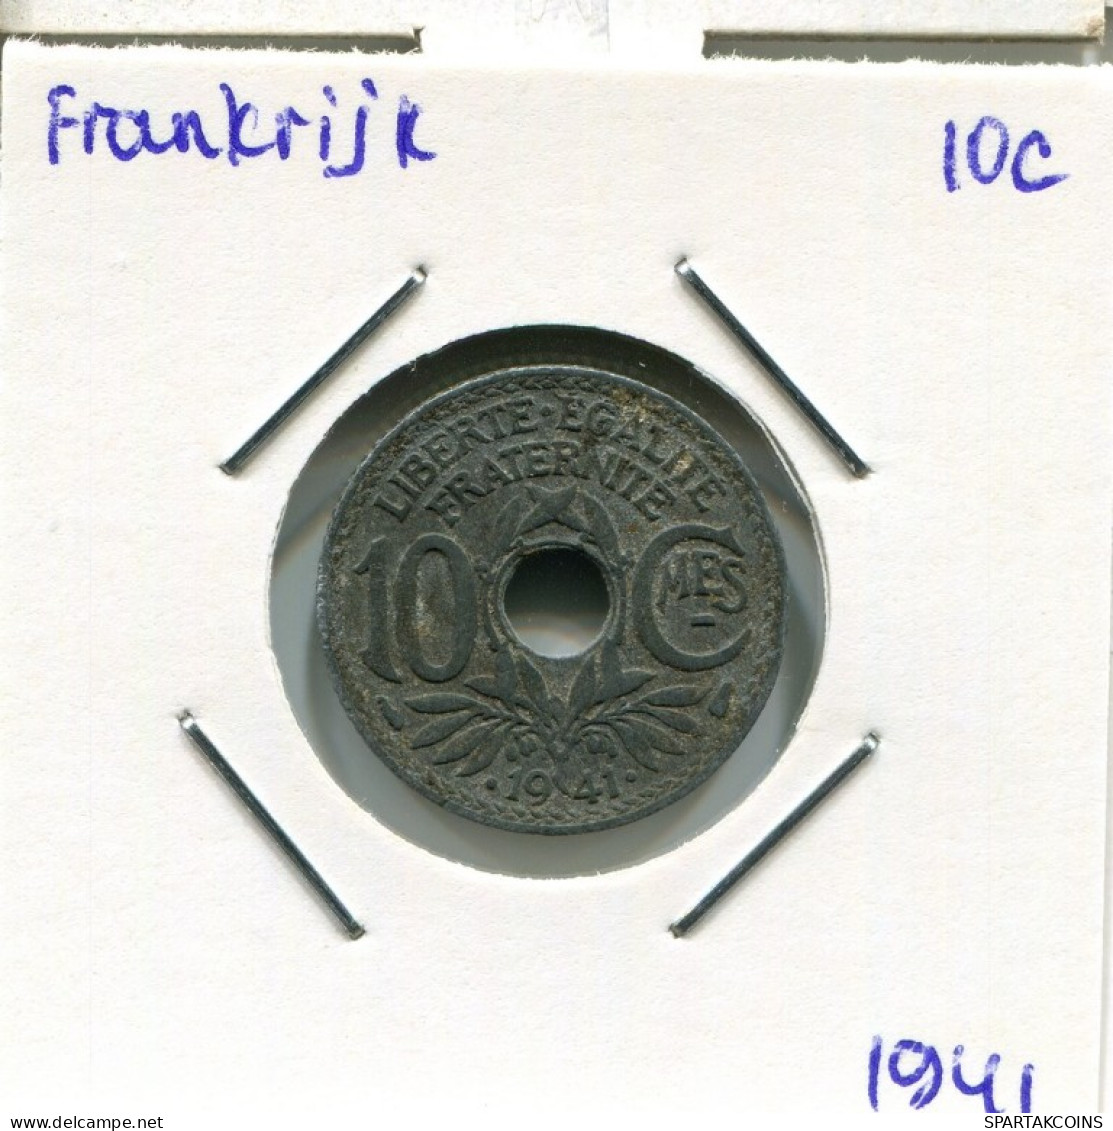 10 CENTIMES 1941 FRANCE Coin French Coin #AM801.U.A - 10 Centimes